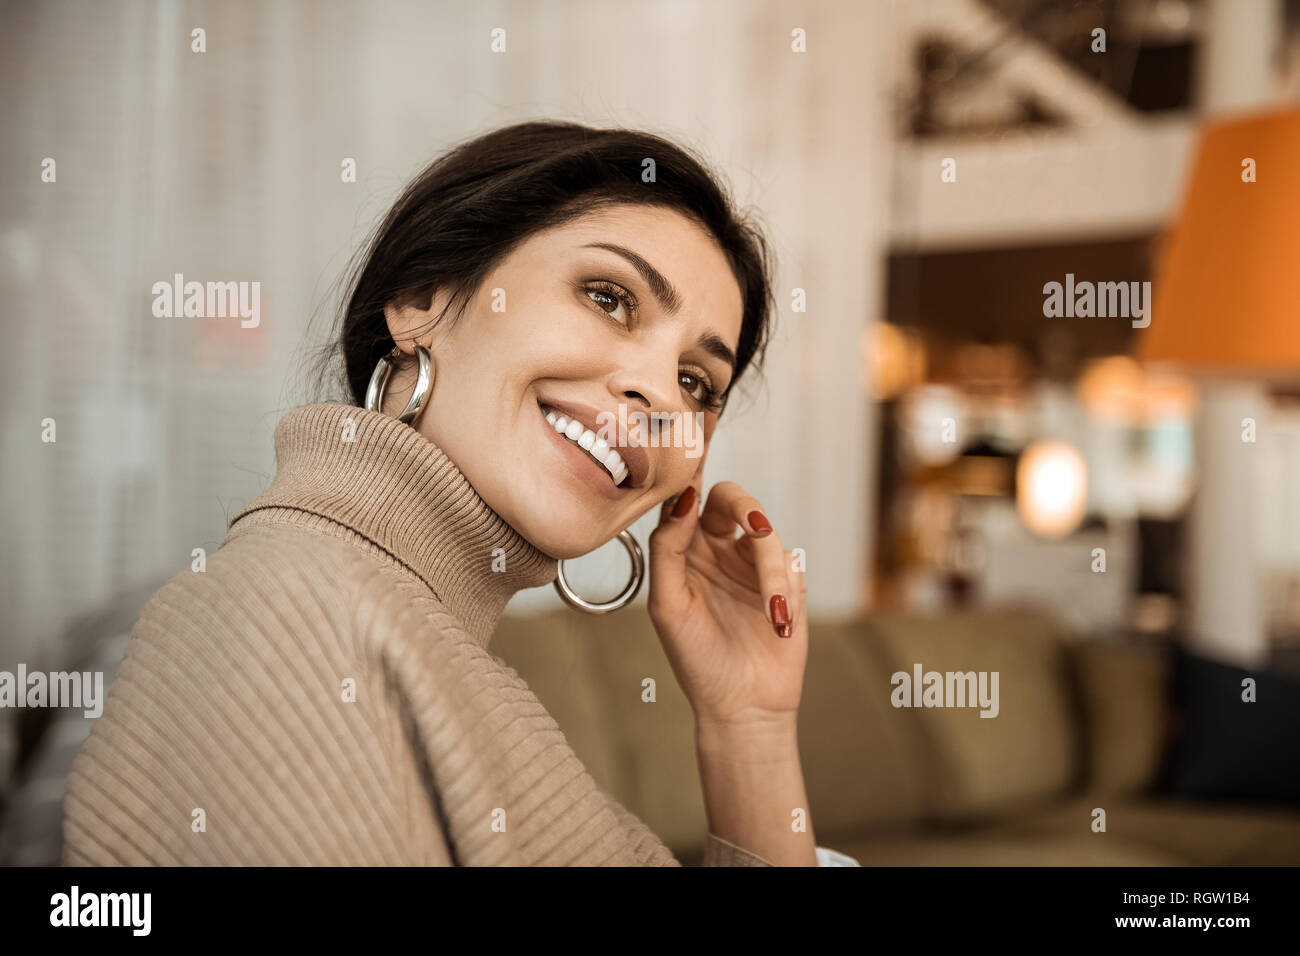 Appealing beaming lady with dark hair thoughtfully sitting on couch Stock Photo